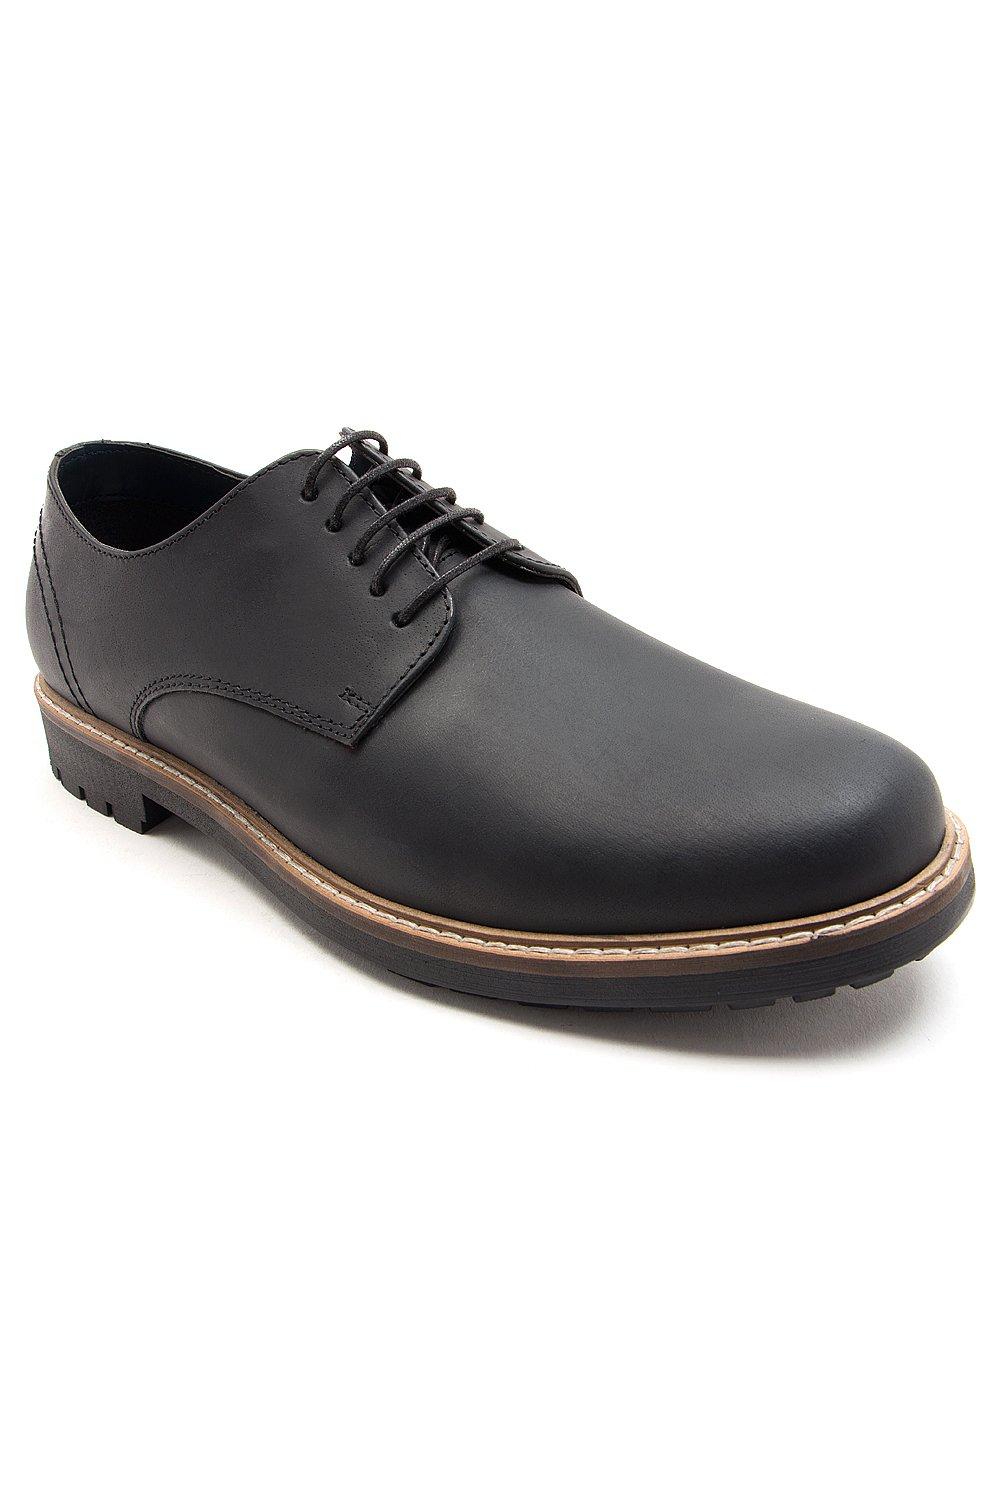 Shoes | 'Risley' Derby Shoes, Stylish Comfortable and Classic Casual ...